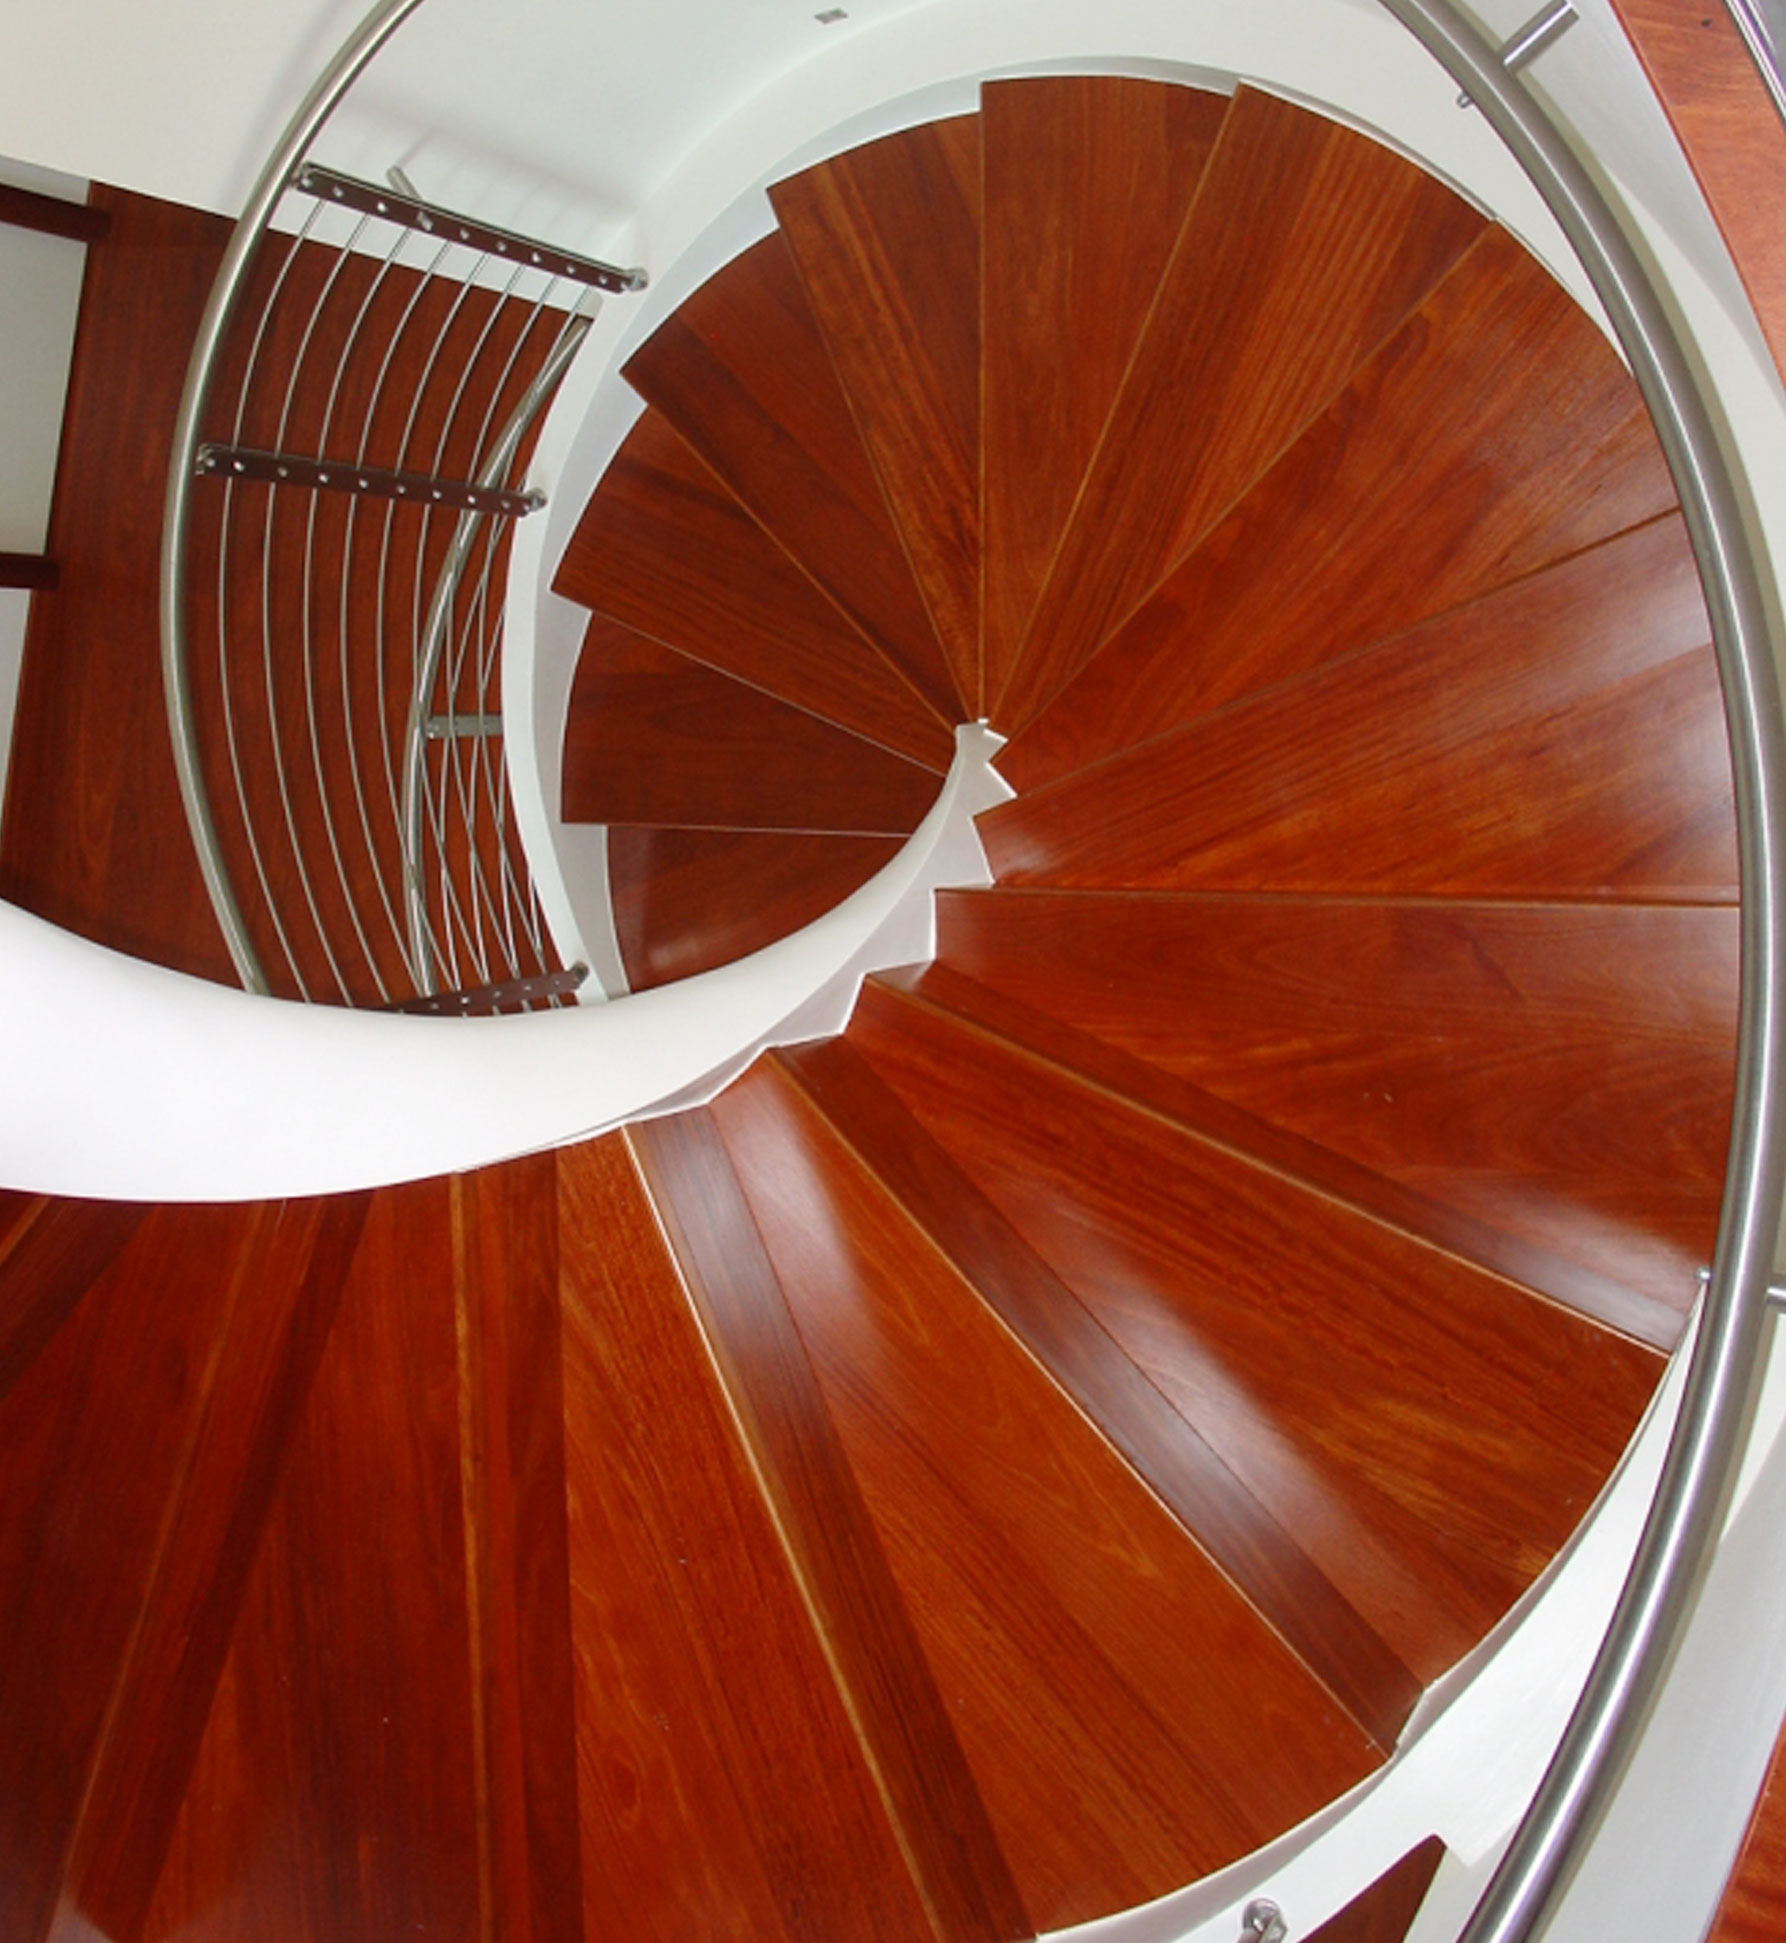 Cladding for helical staircases